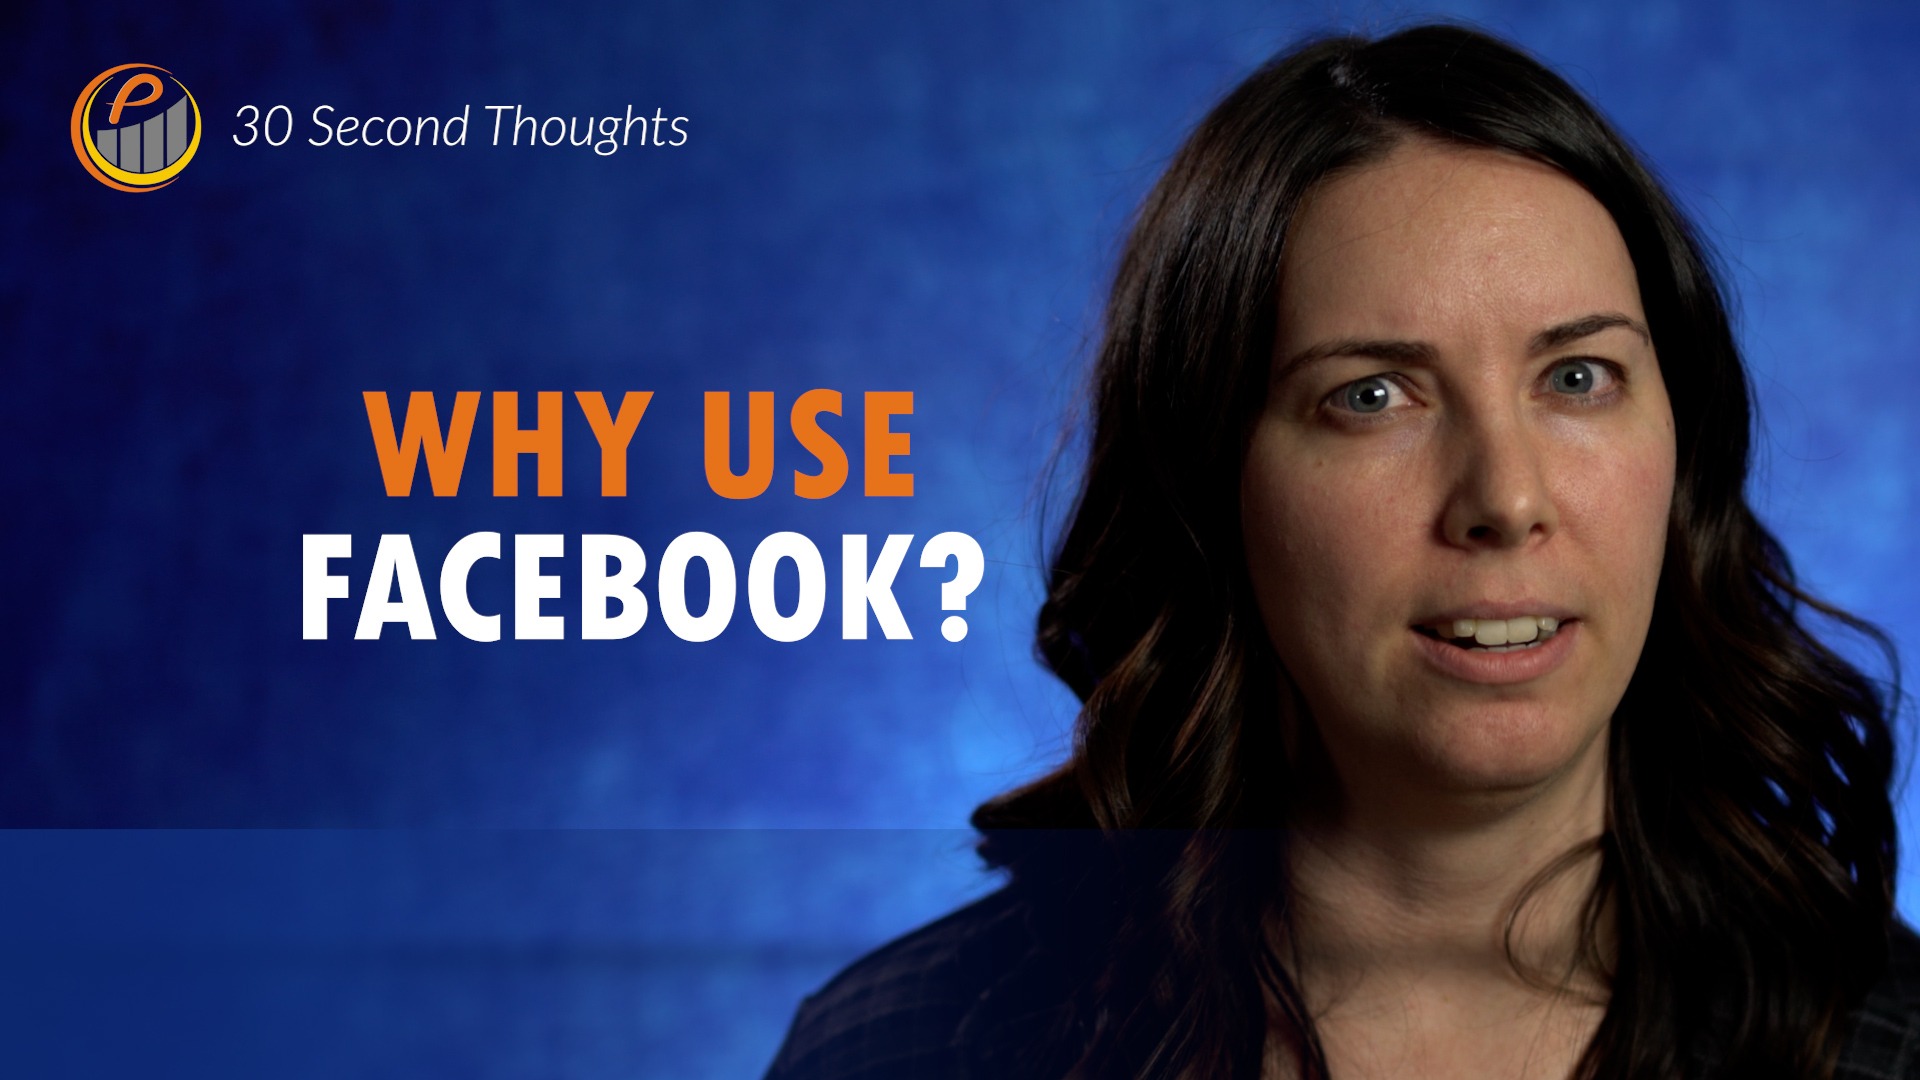 Why Use Facebook?